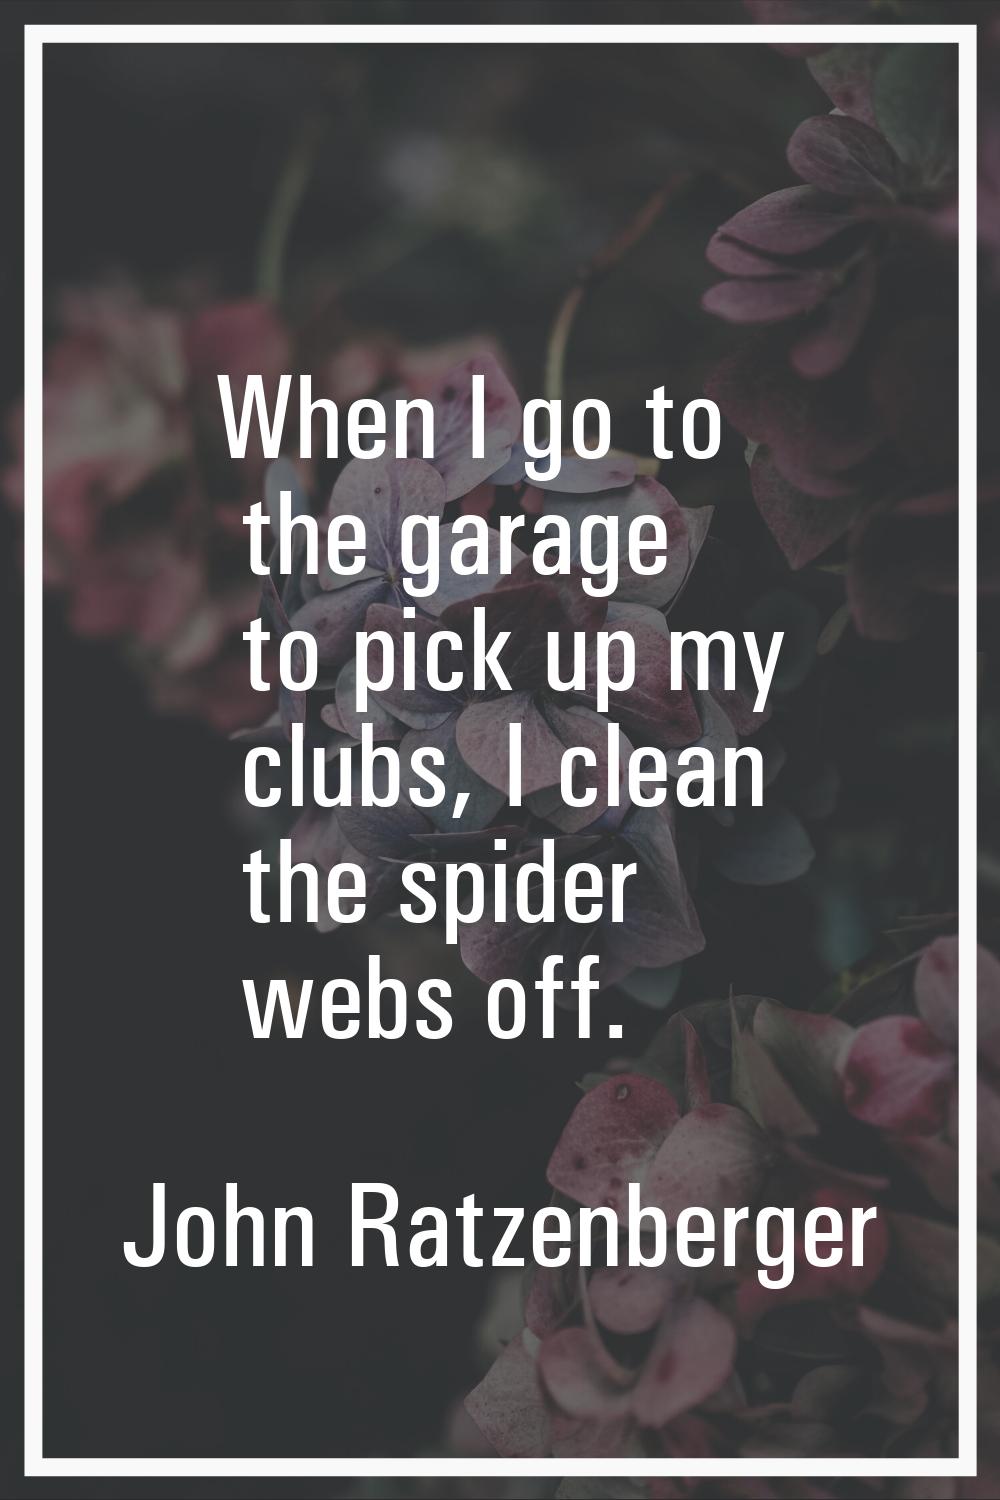 When I go to the garage to pick up my clubs, I clean the spider webs off.